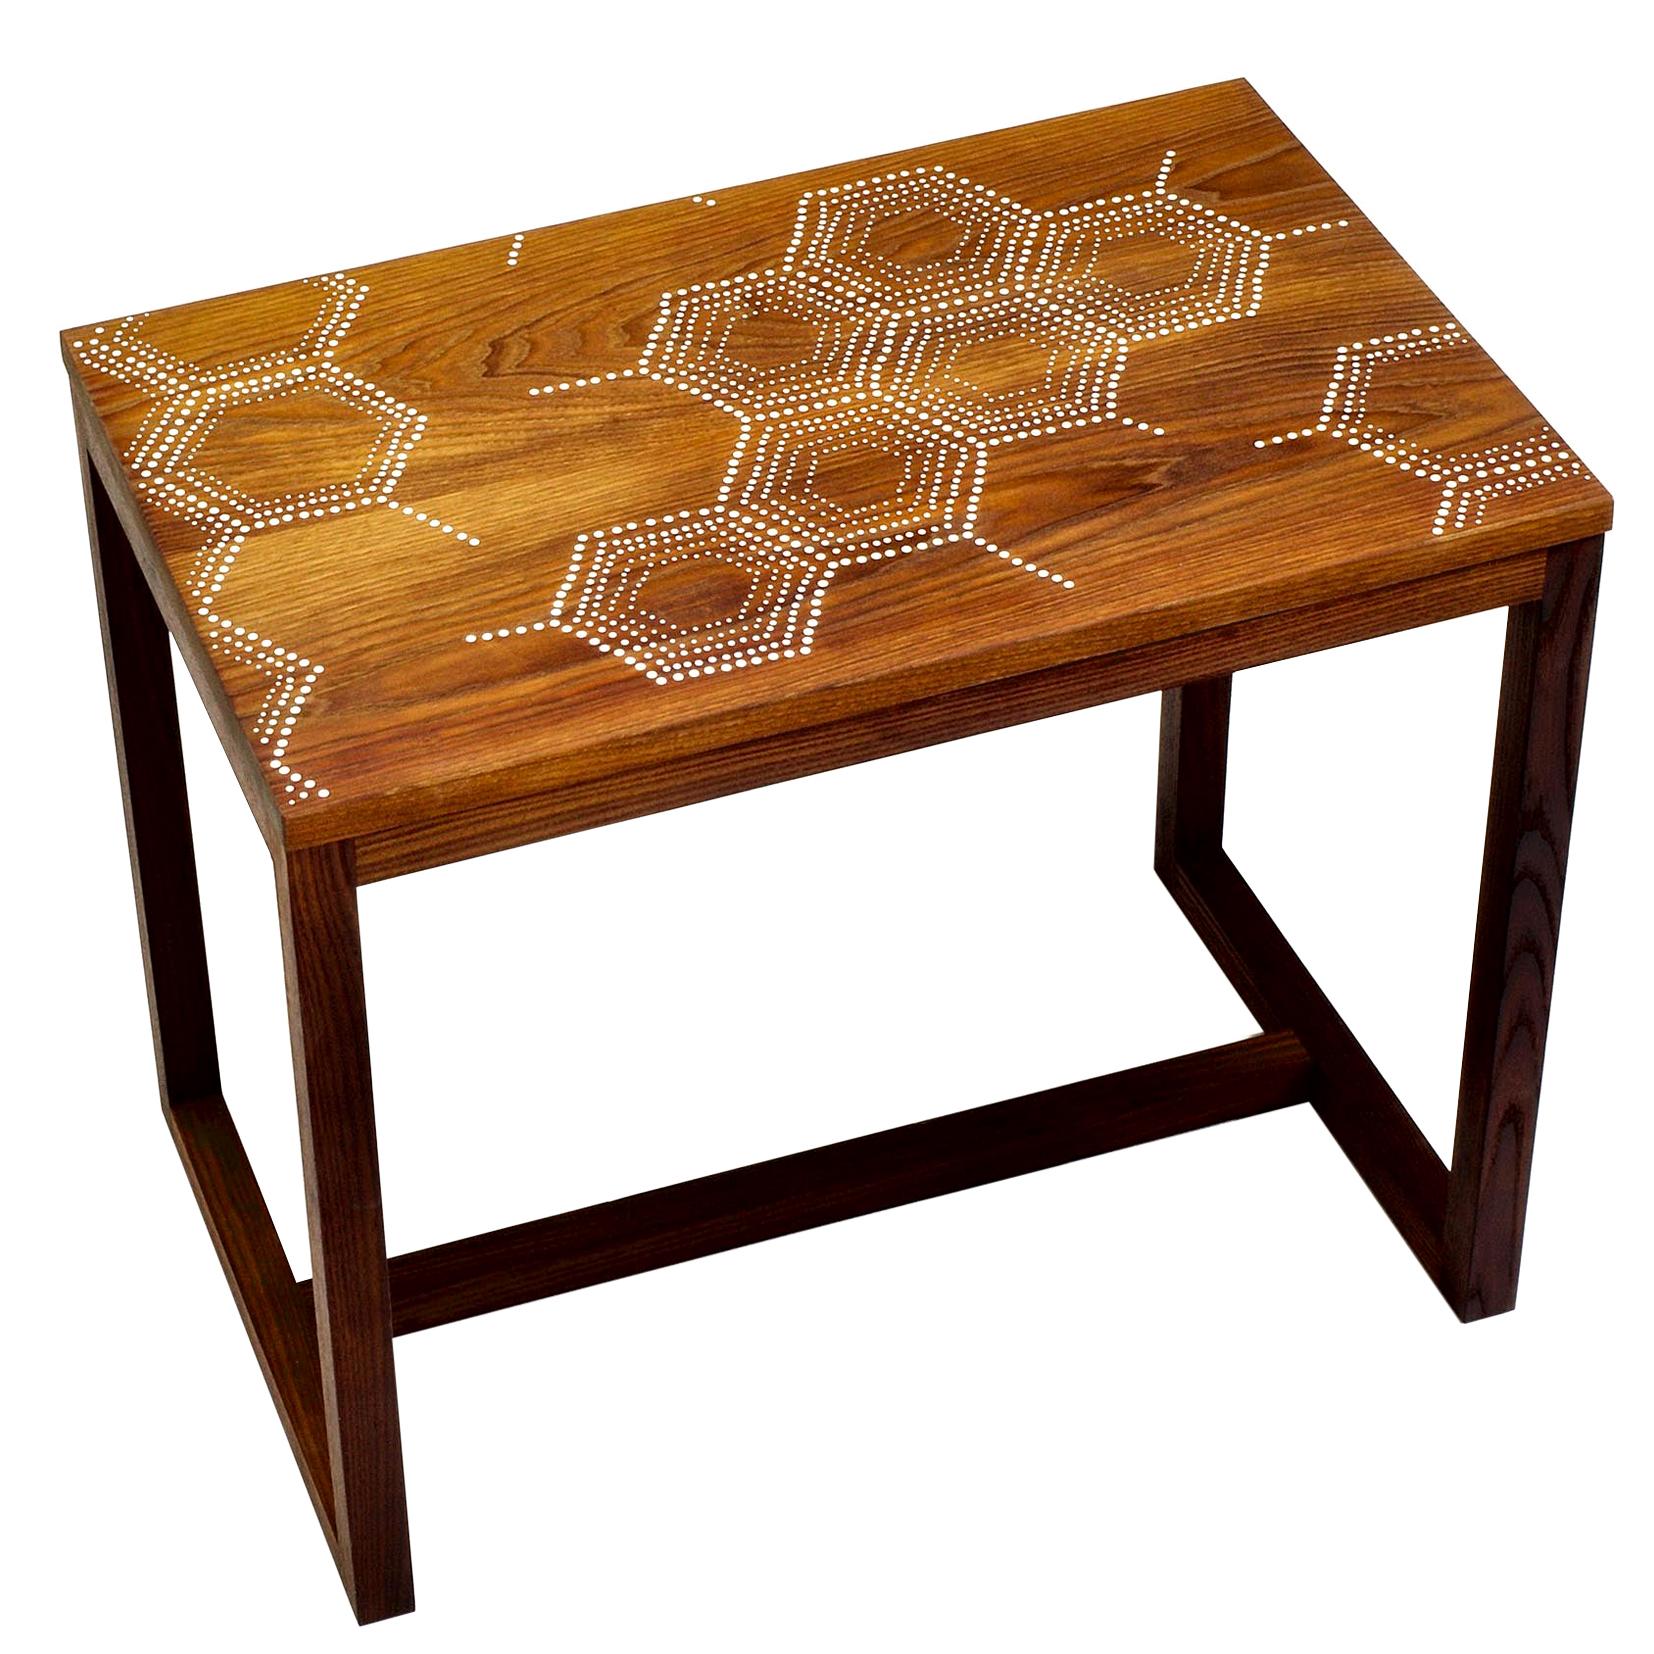 Modern Contemporary Nail Inlay End Table No. 204 by Peter Sandback For Sale